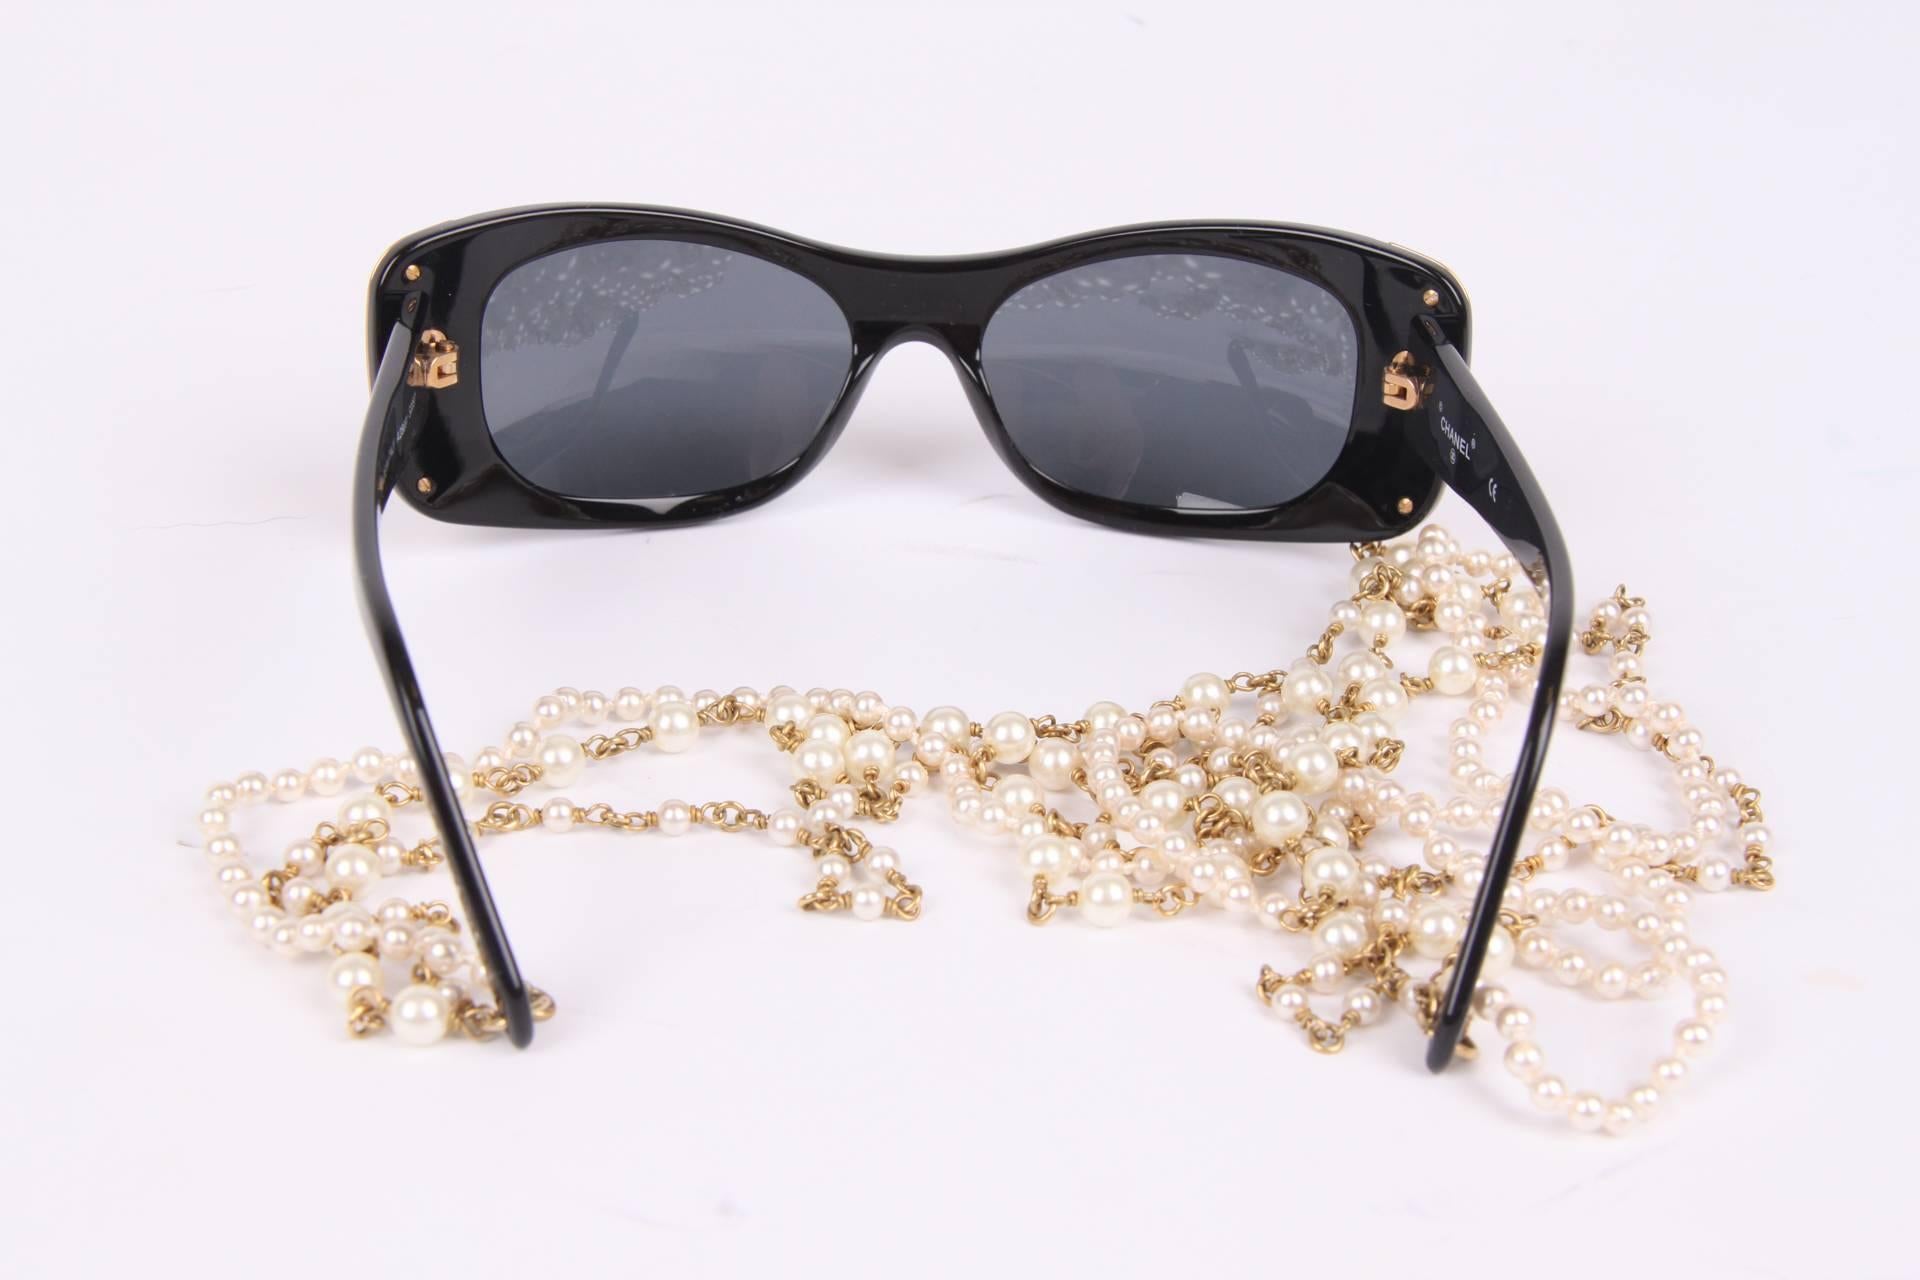 Black Chanel Sunglasses with Pearl Necklace - black